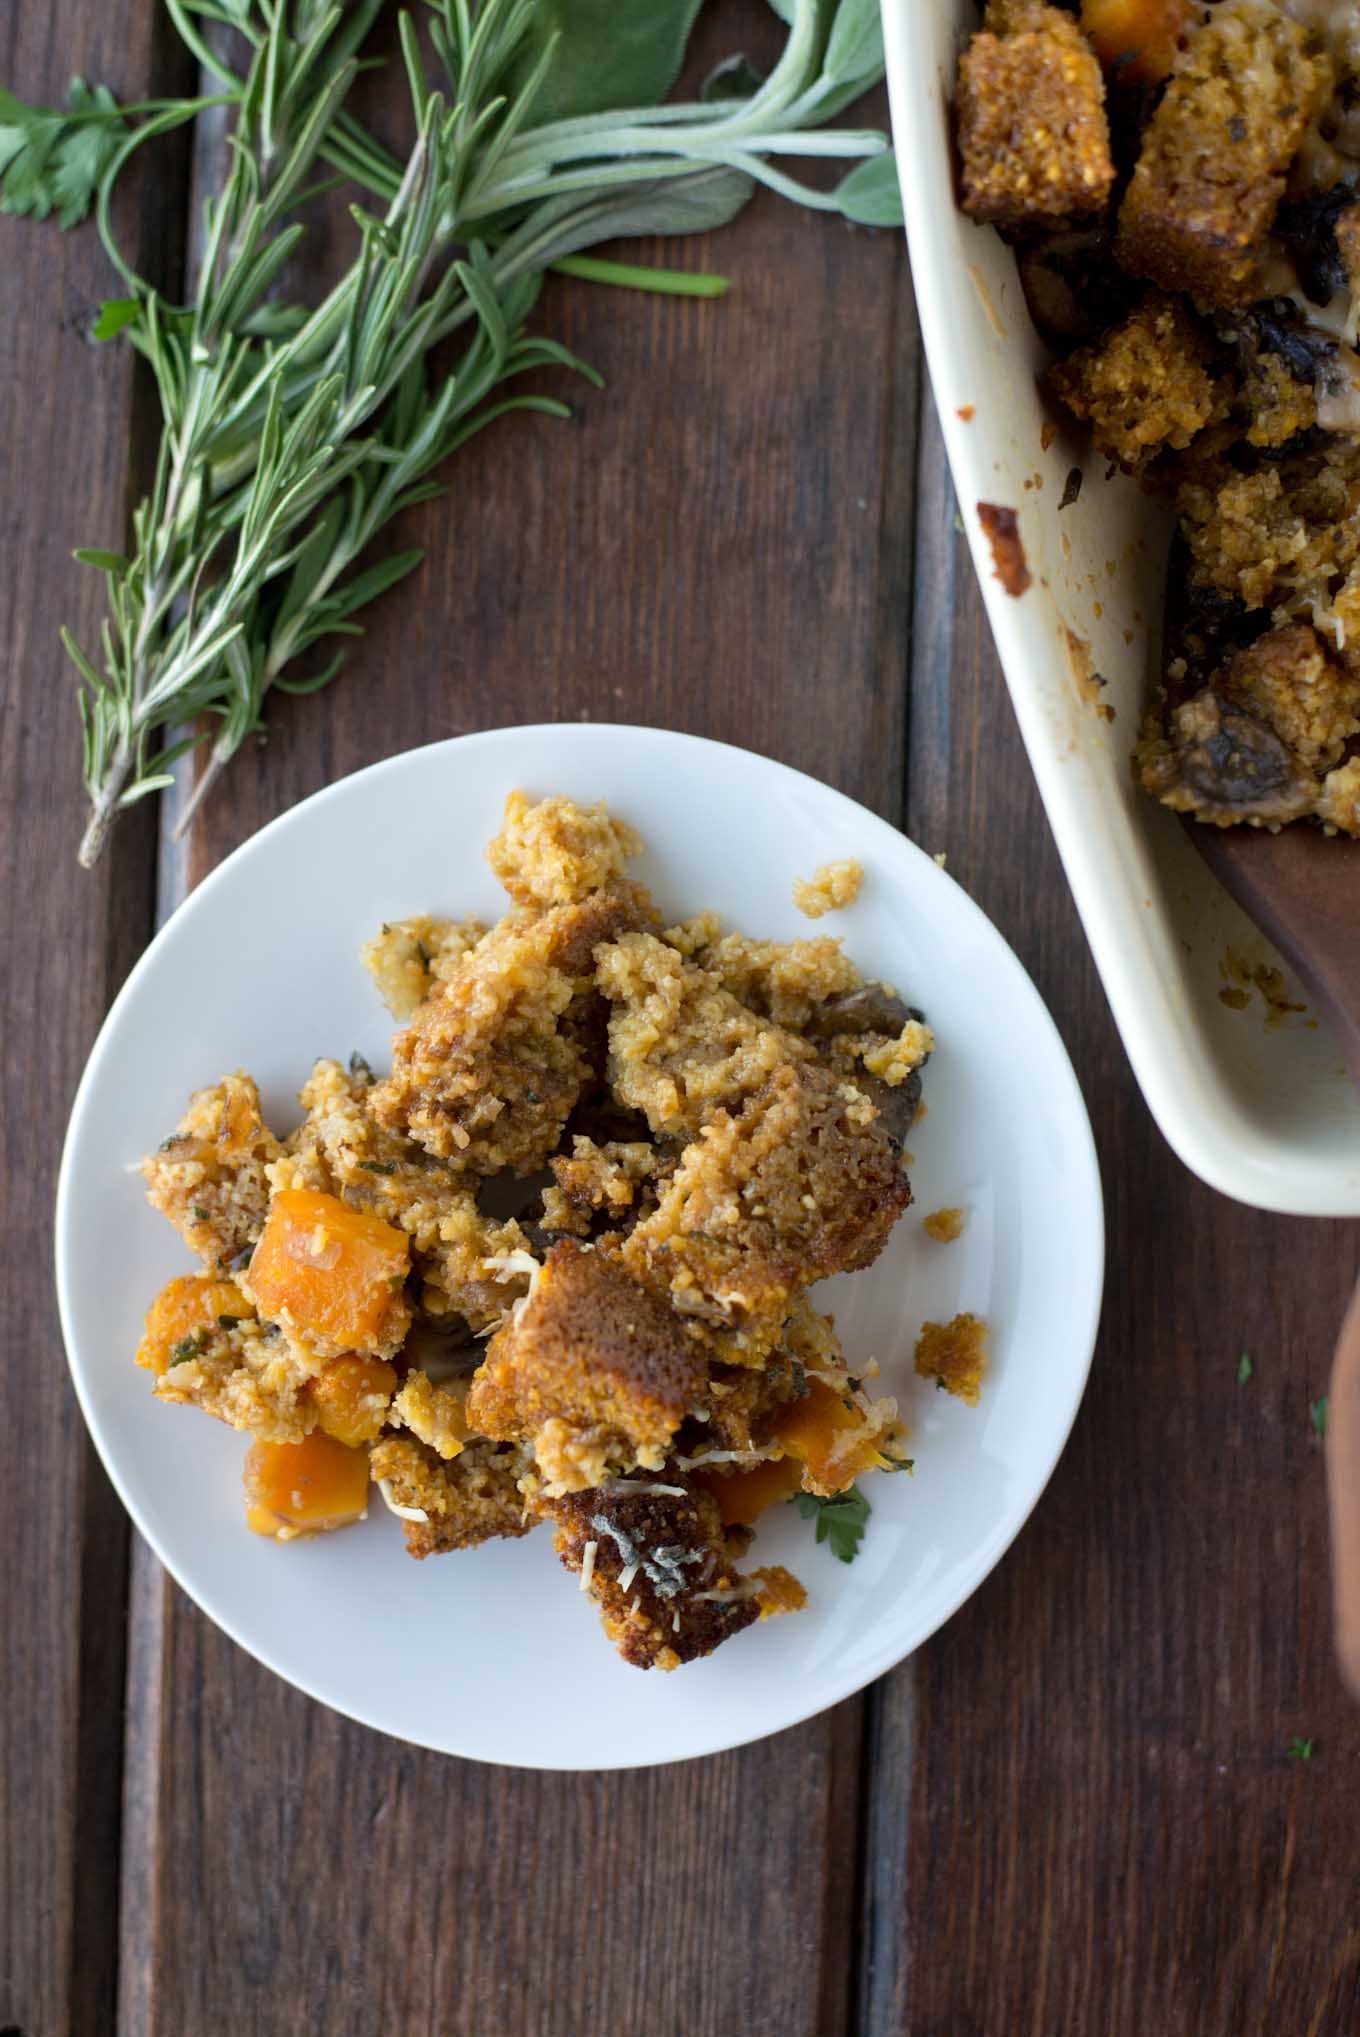 Fear Stuffing no more, check out this healthy and quick stuffing recipe that packs a big punch.